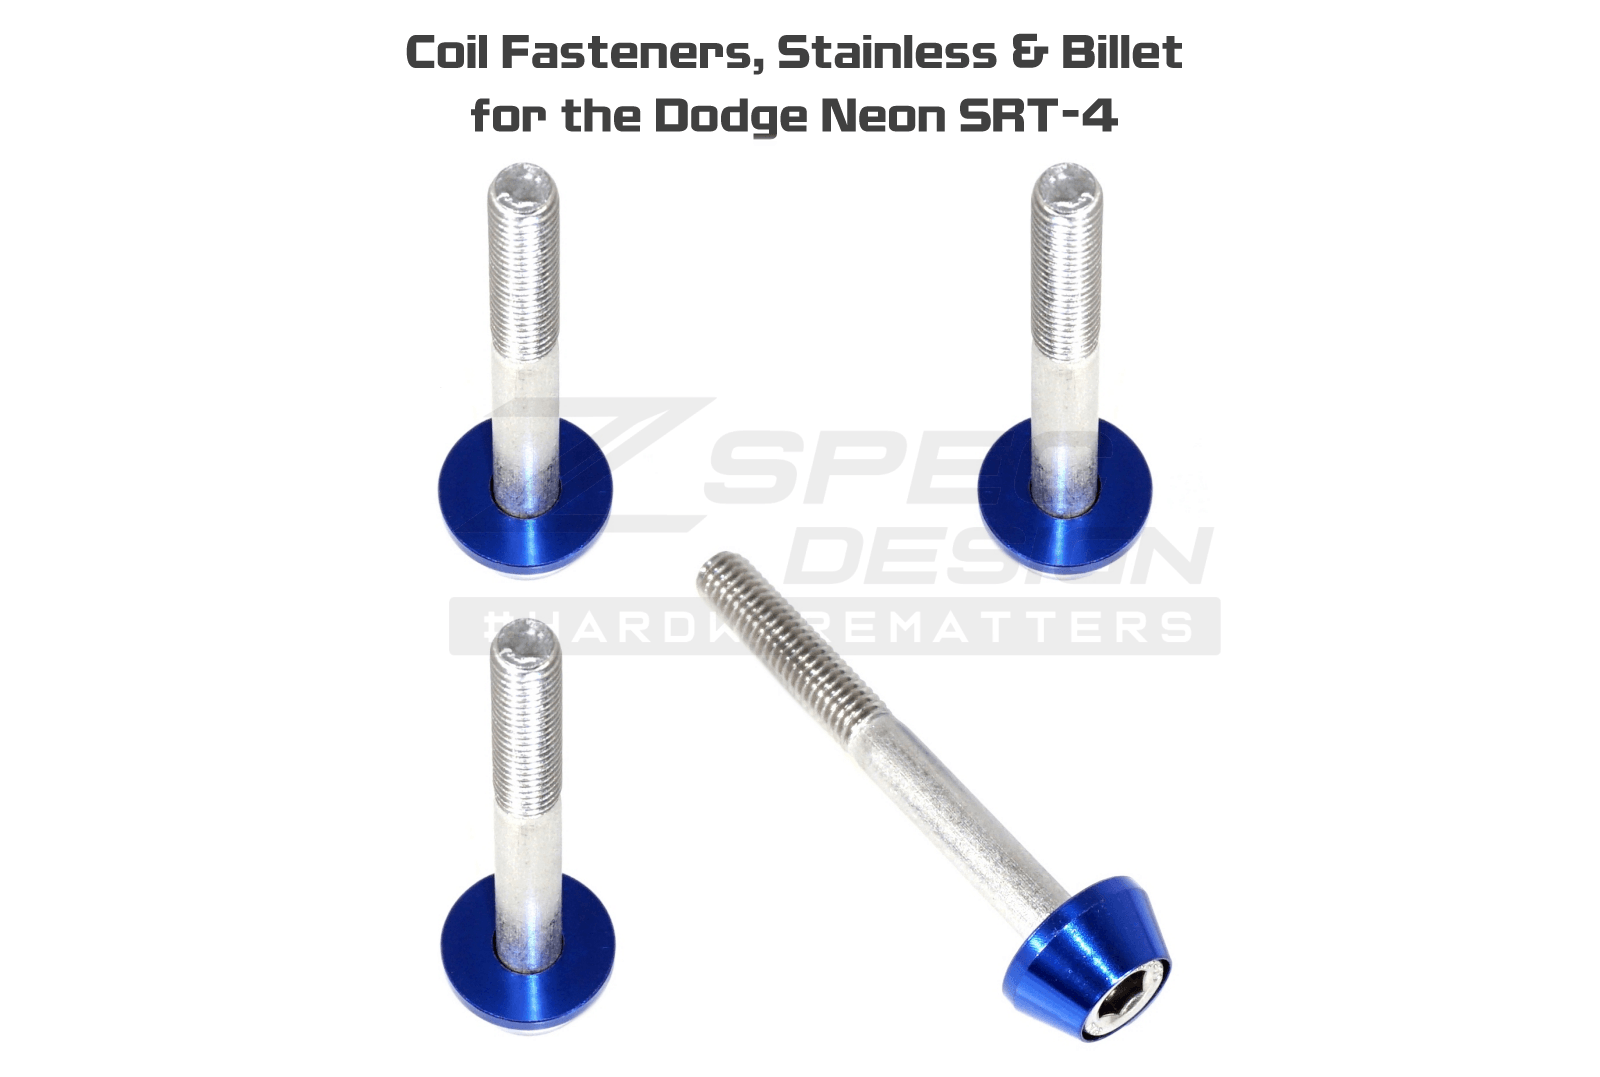 ZSPEC Dress Up Bolts® Coil Fasteners for '03-05 Dodge Neon SRT-4, Stainless/Billet Hardware Dress Up Bolts Fasteners Washers Red Blue Purple Gold Burned Black Beauty, Car Show, Engine Bay Upgrade Performance